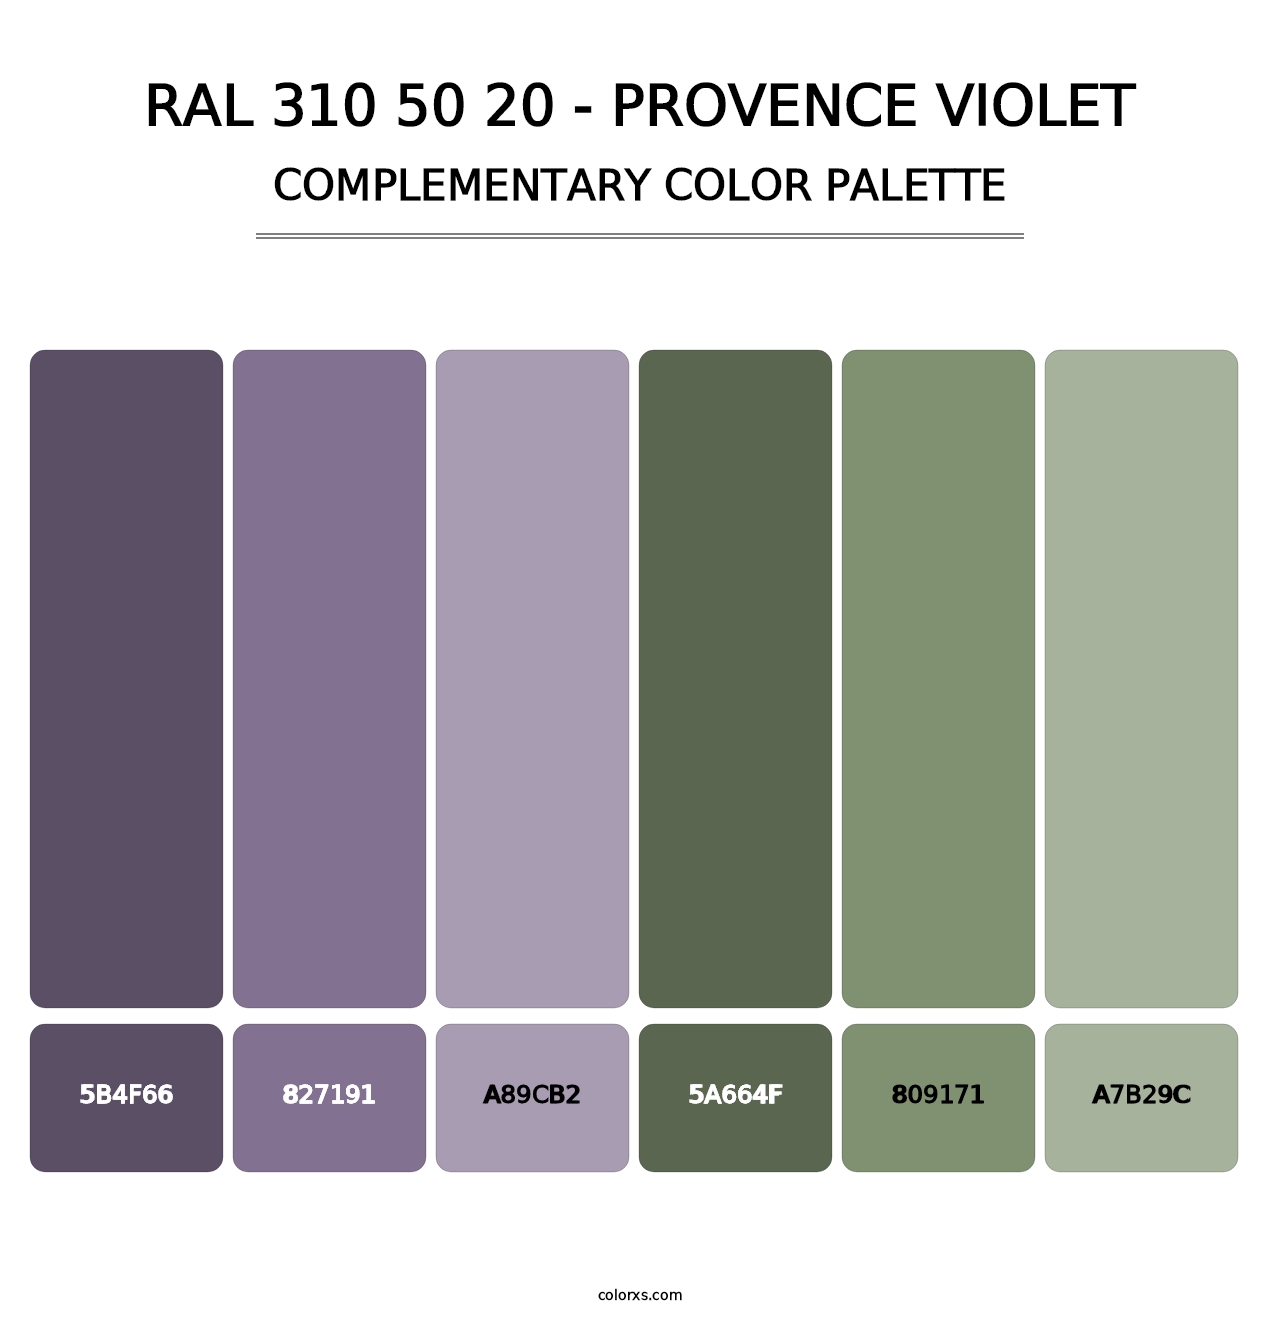 RAL 310 50 20 - Provence Violet - Complementary Color Palette